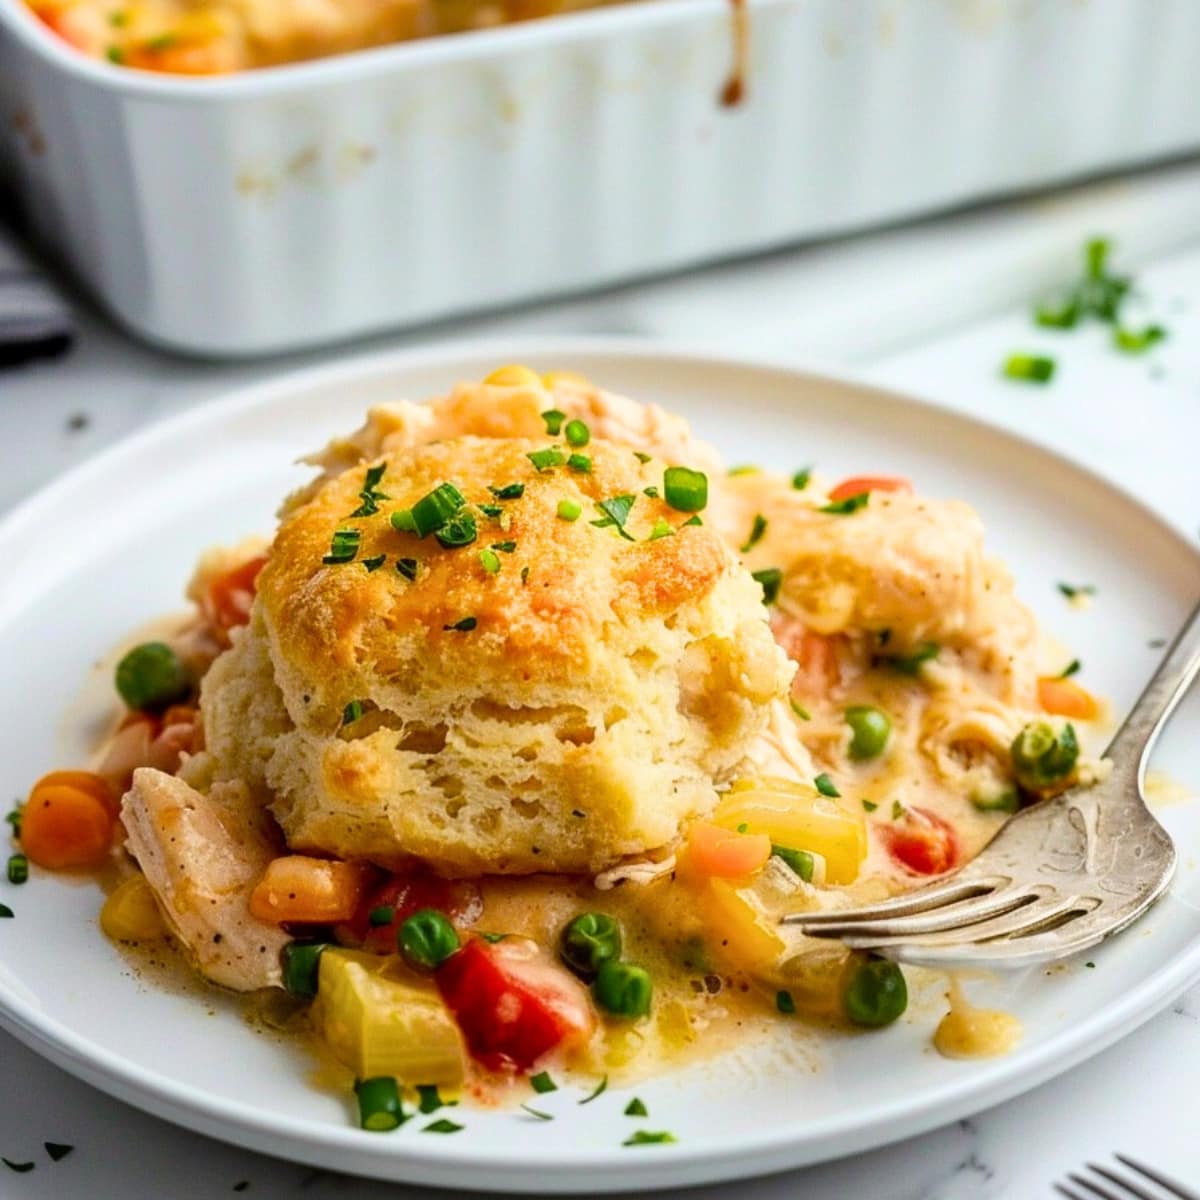 Serving of chicken and biscuit casserole in a white plate with fork.